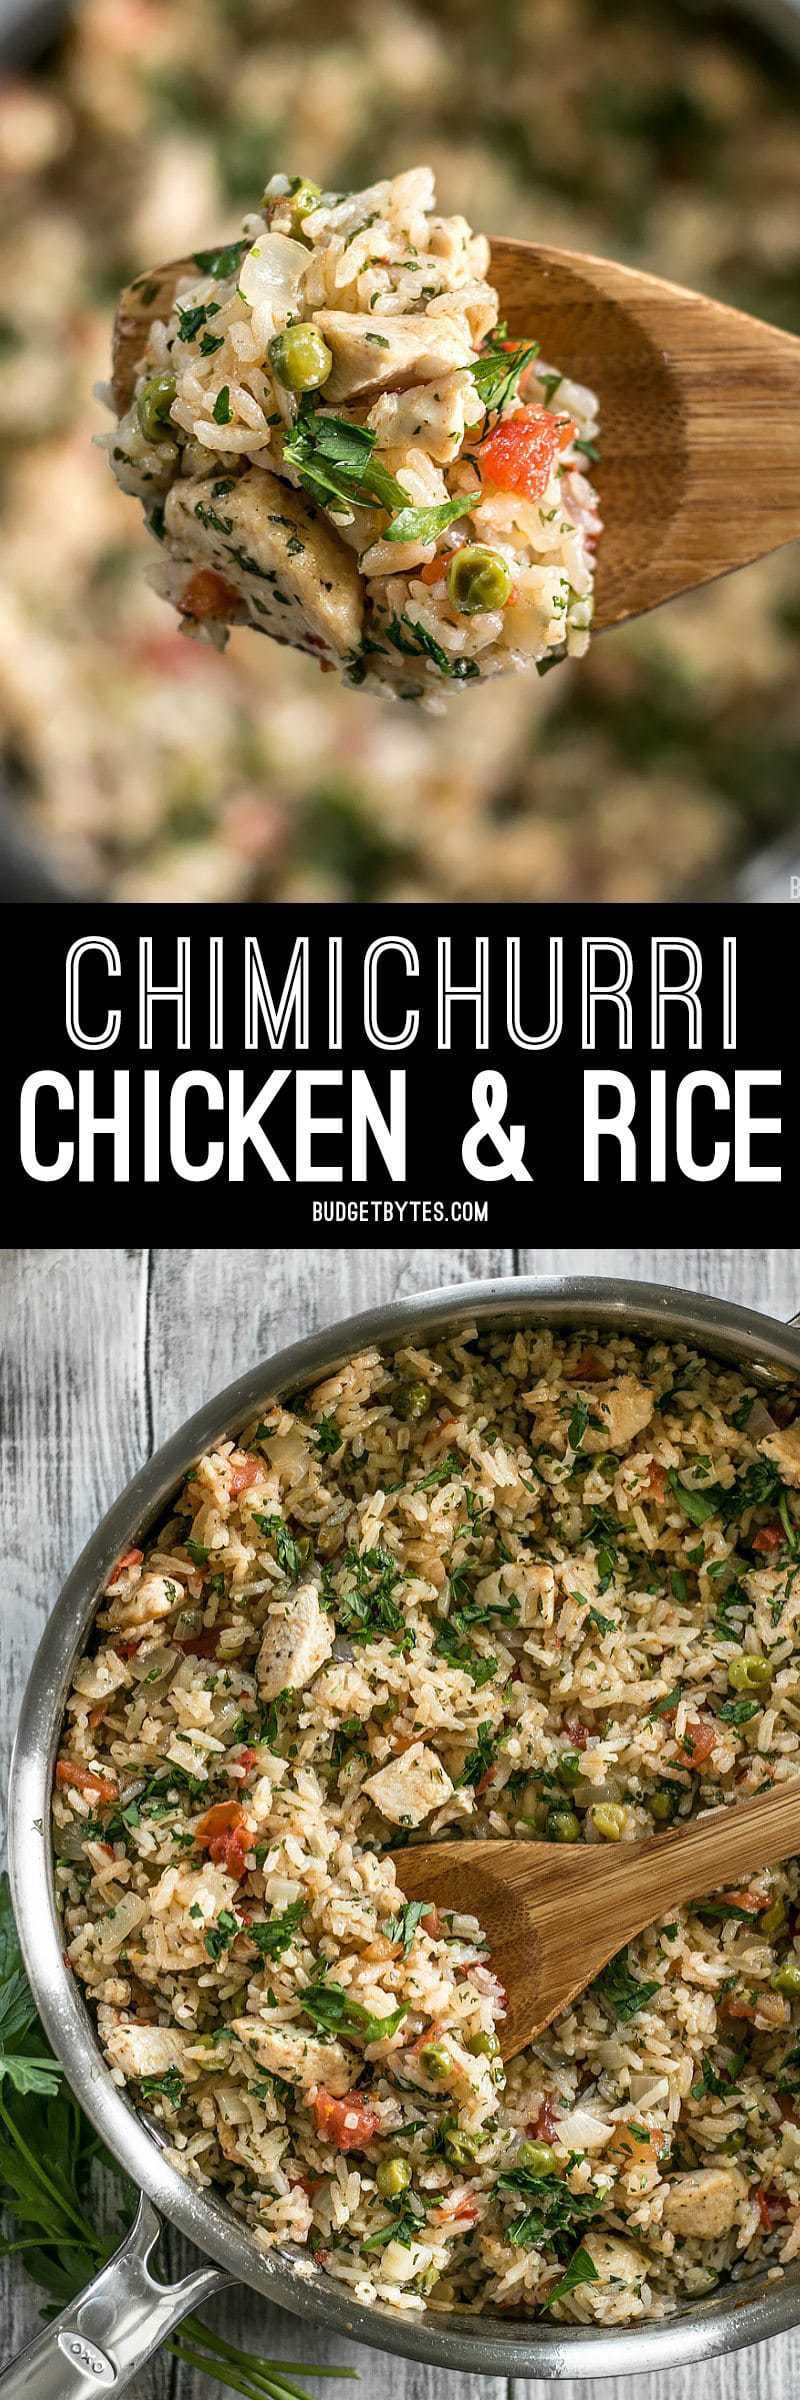 This Chimichurri Chicken and Rice is a bright and vibrant summer meal that cooks in just one pot to make dinner fast and easy. BudgetBytes.com